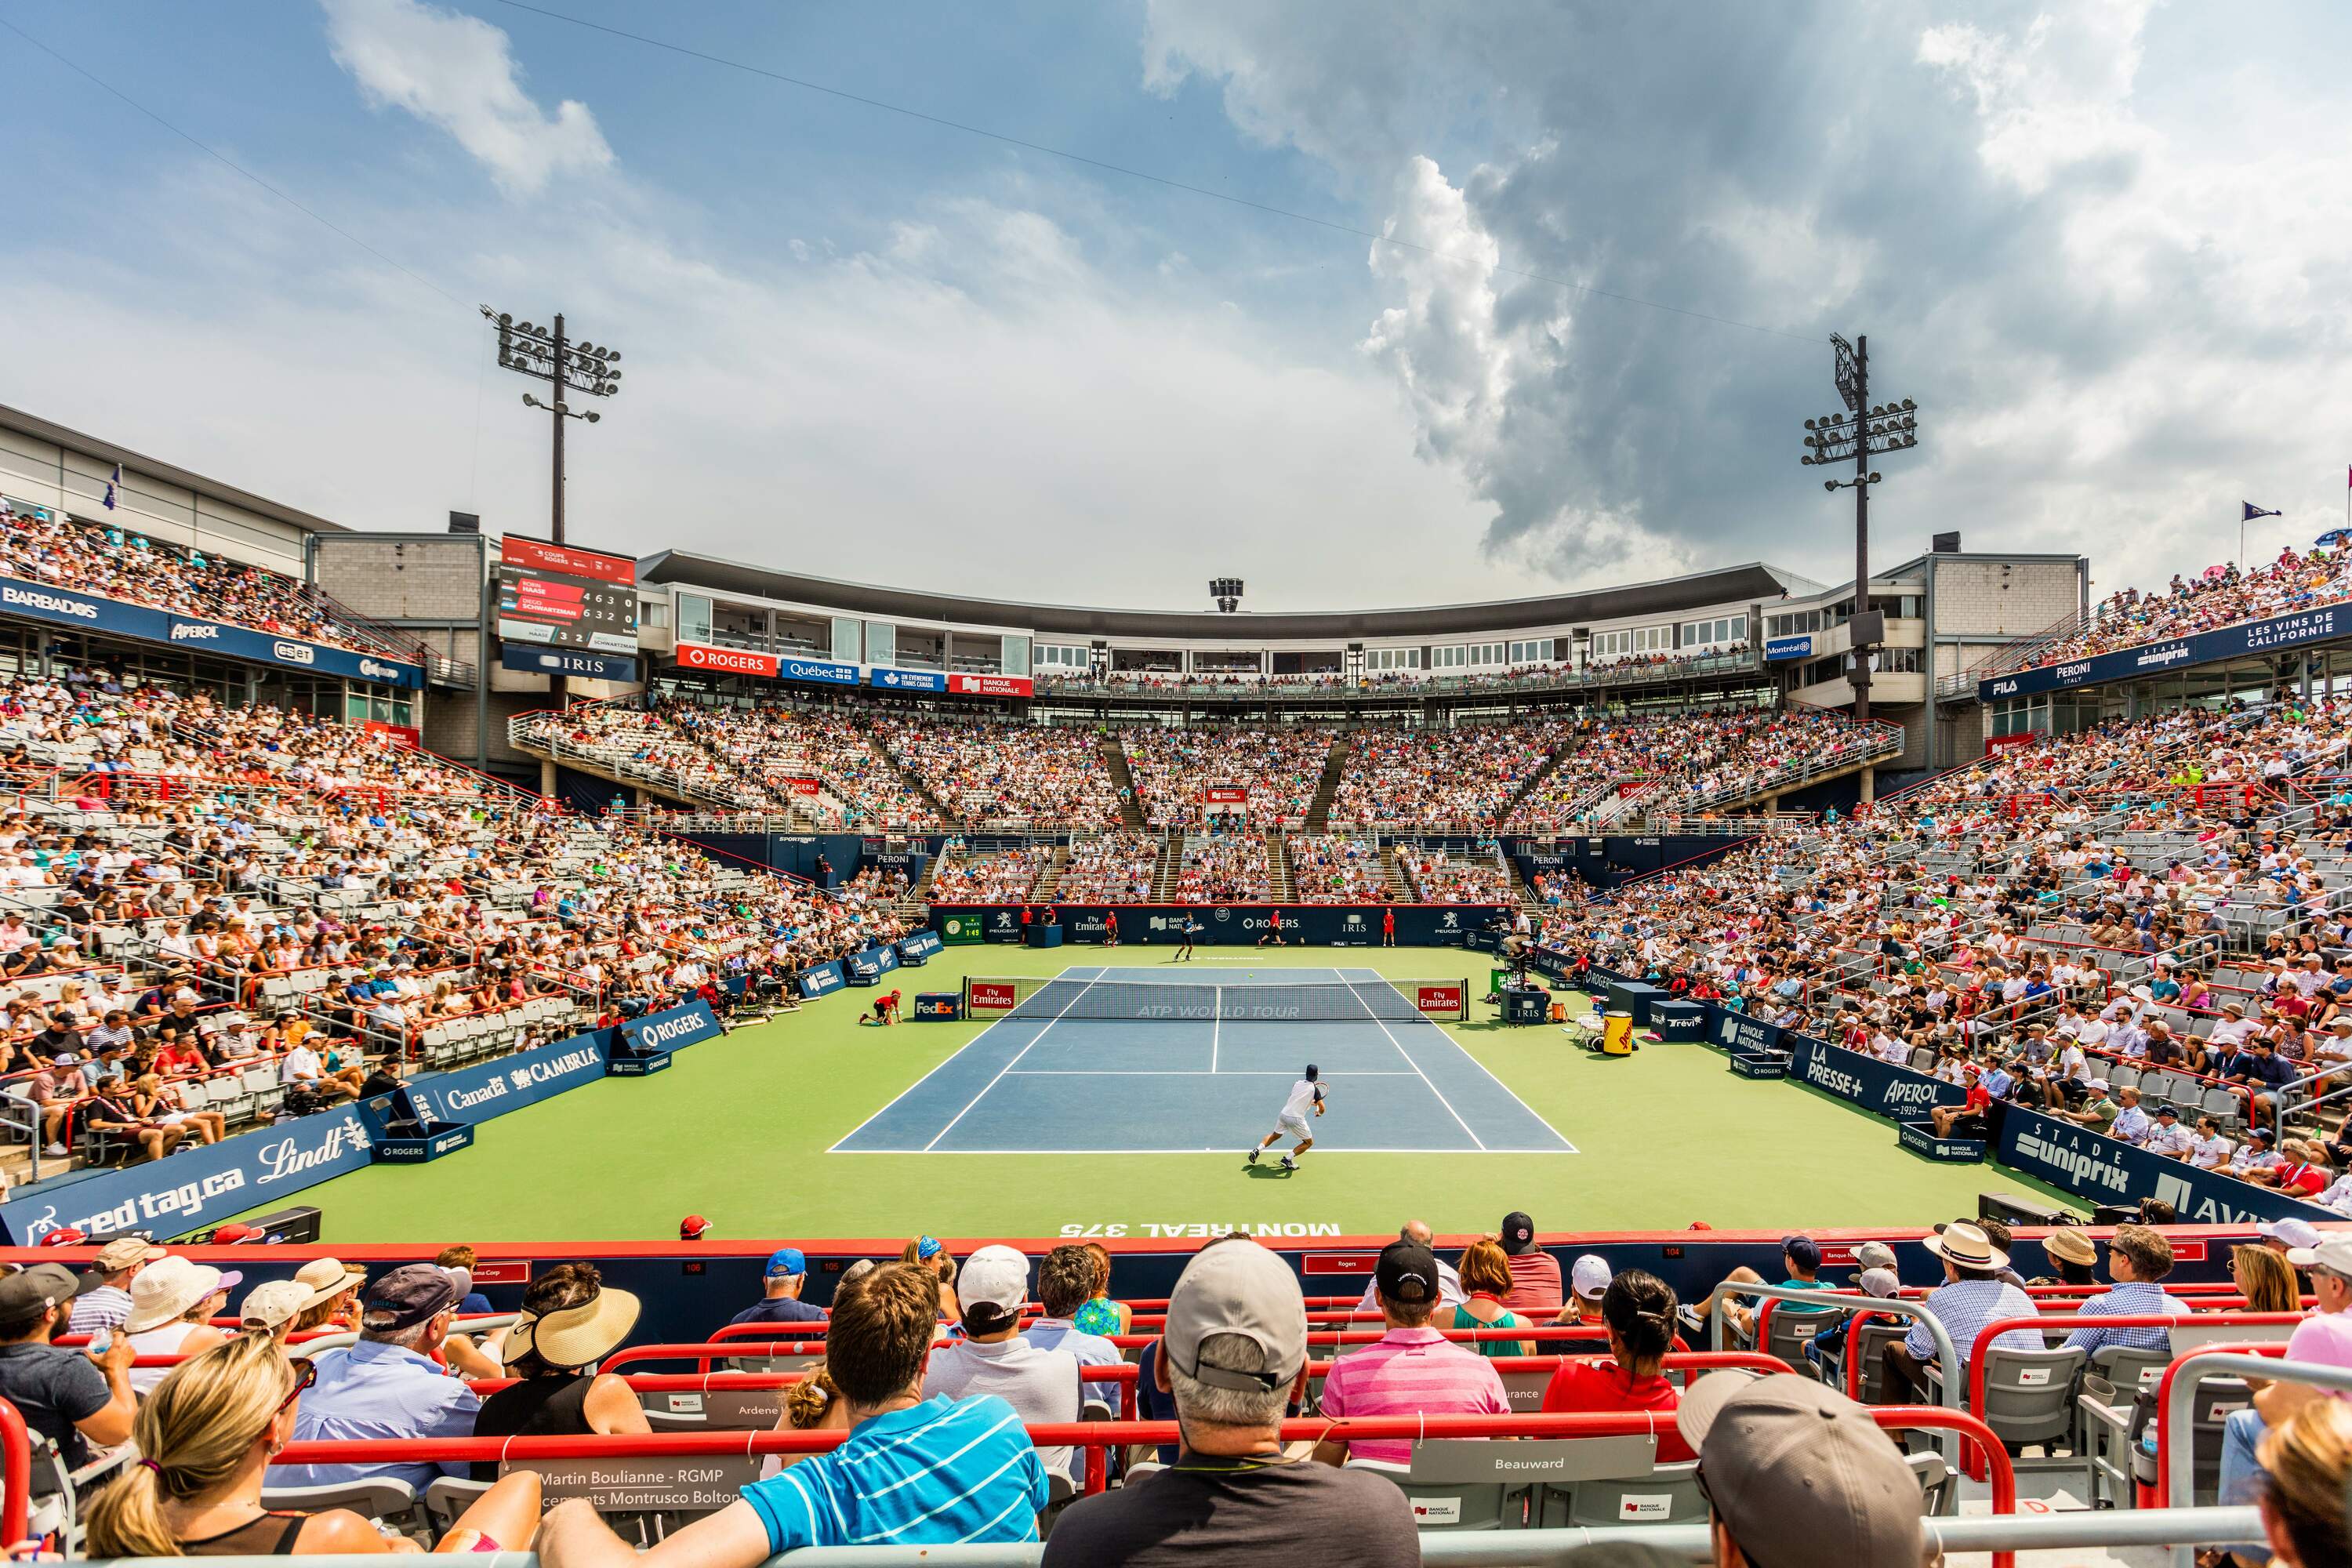 Catch all the tennis action at Montreals The National Bank Open